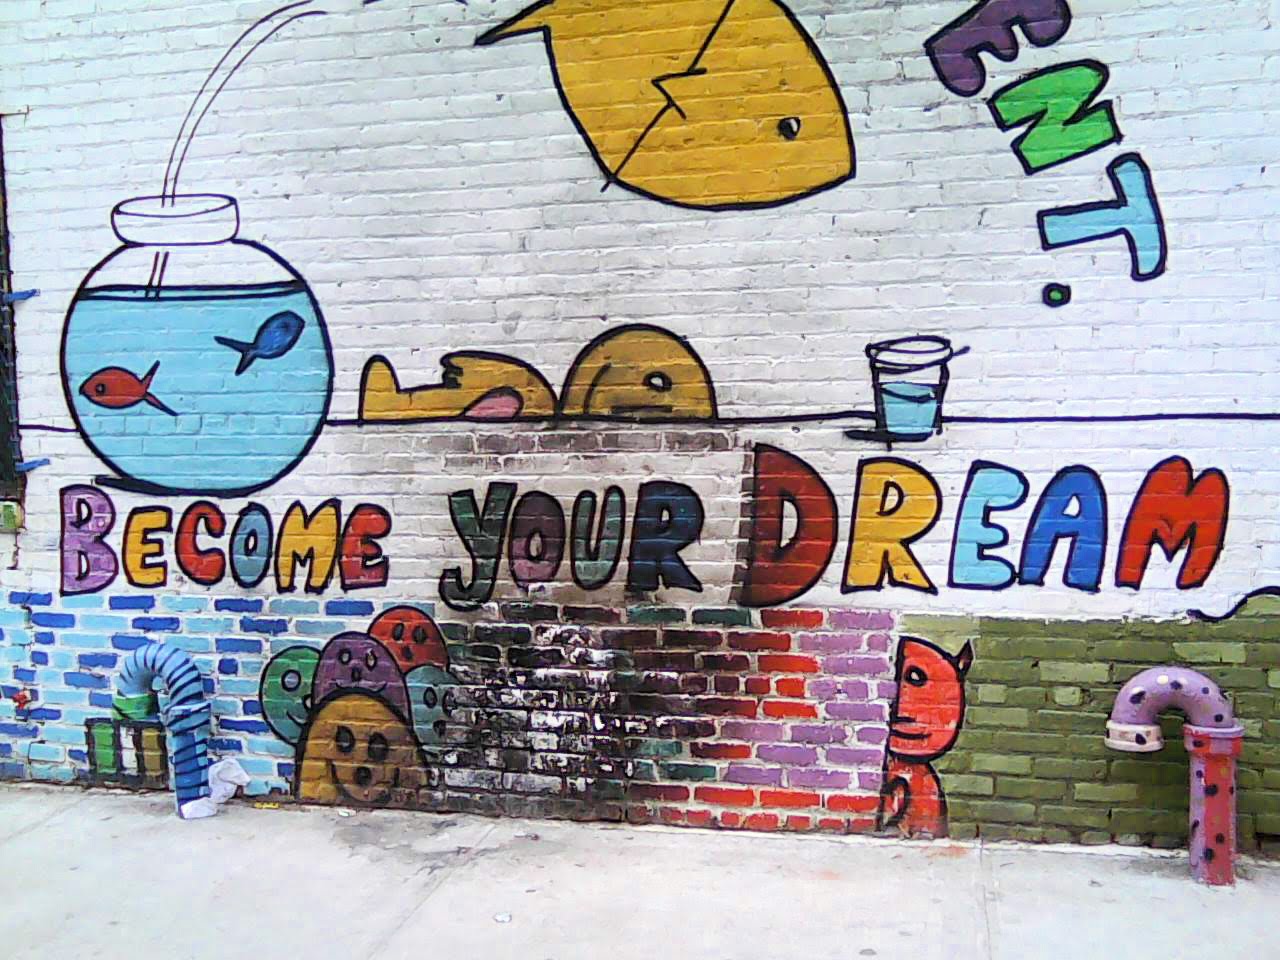 Become Your Dream graphic